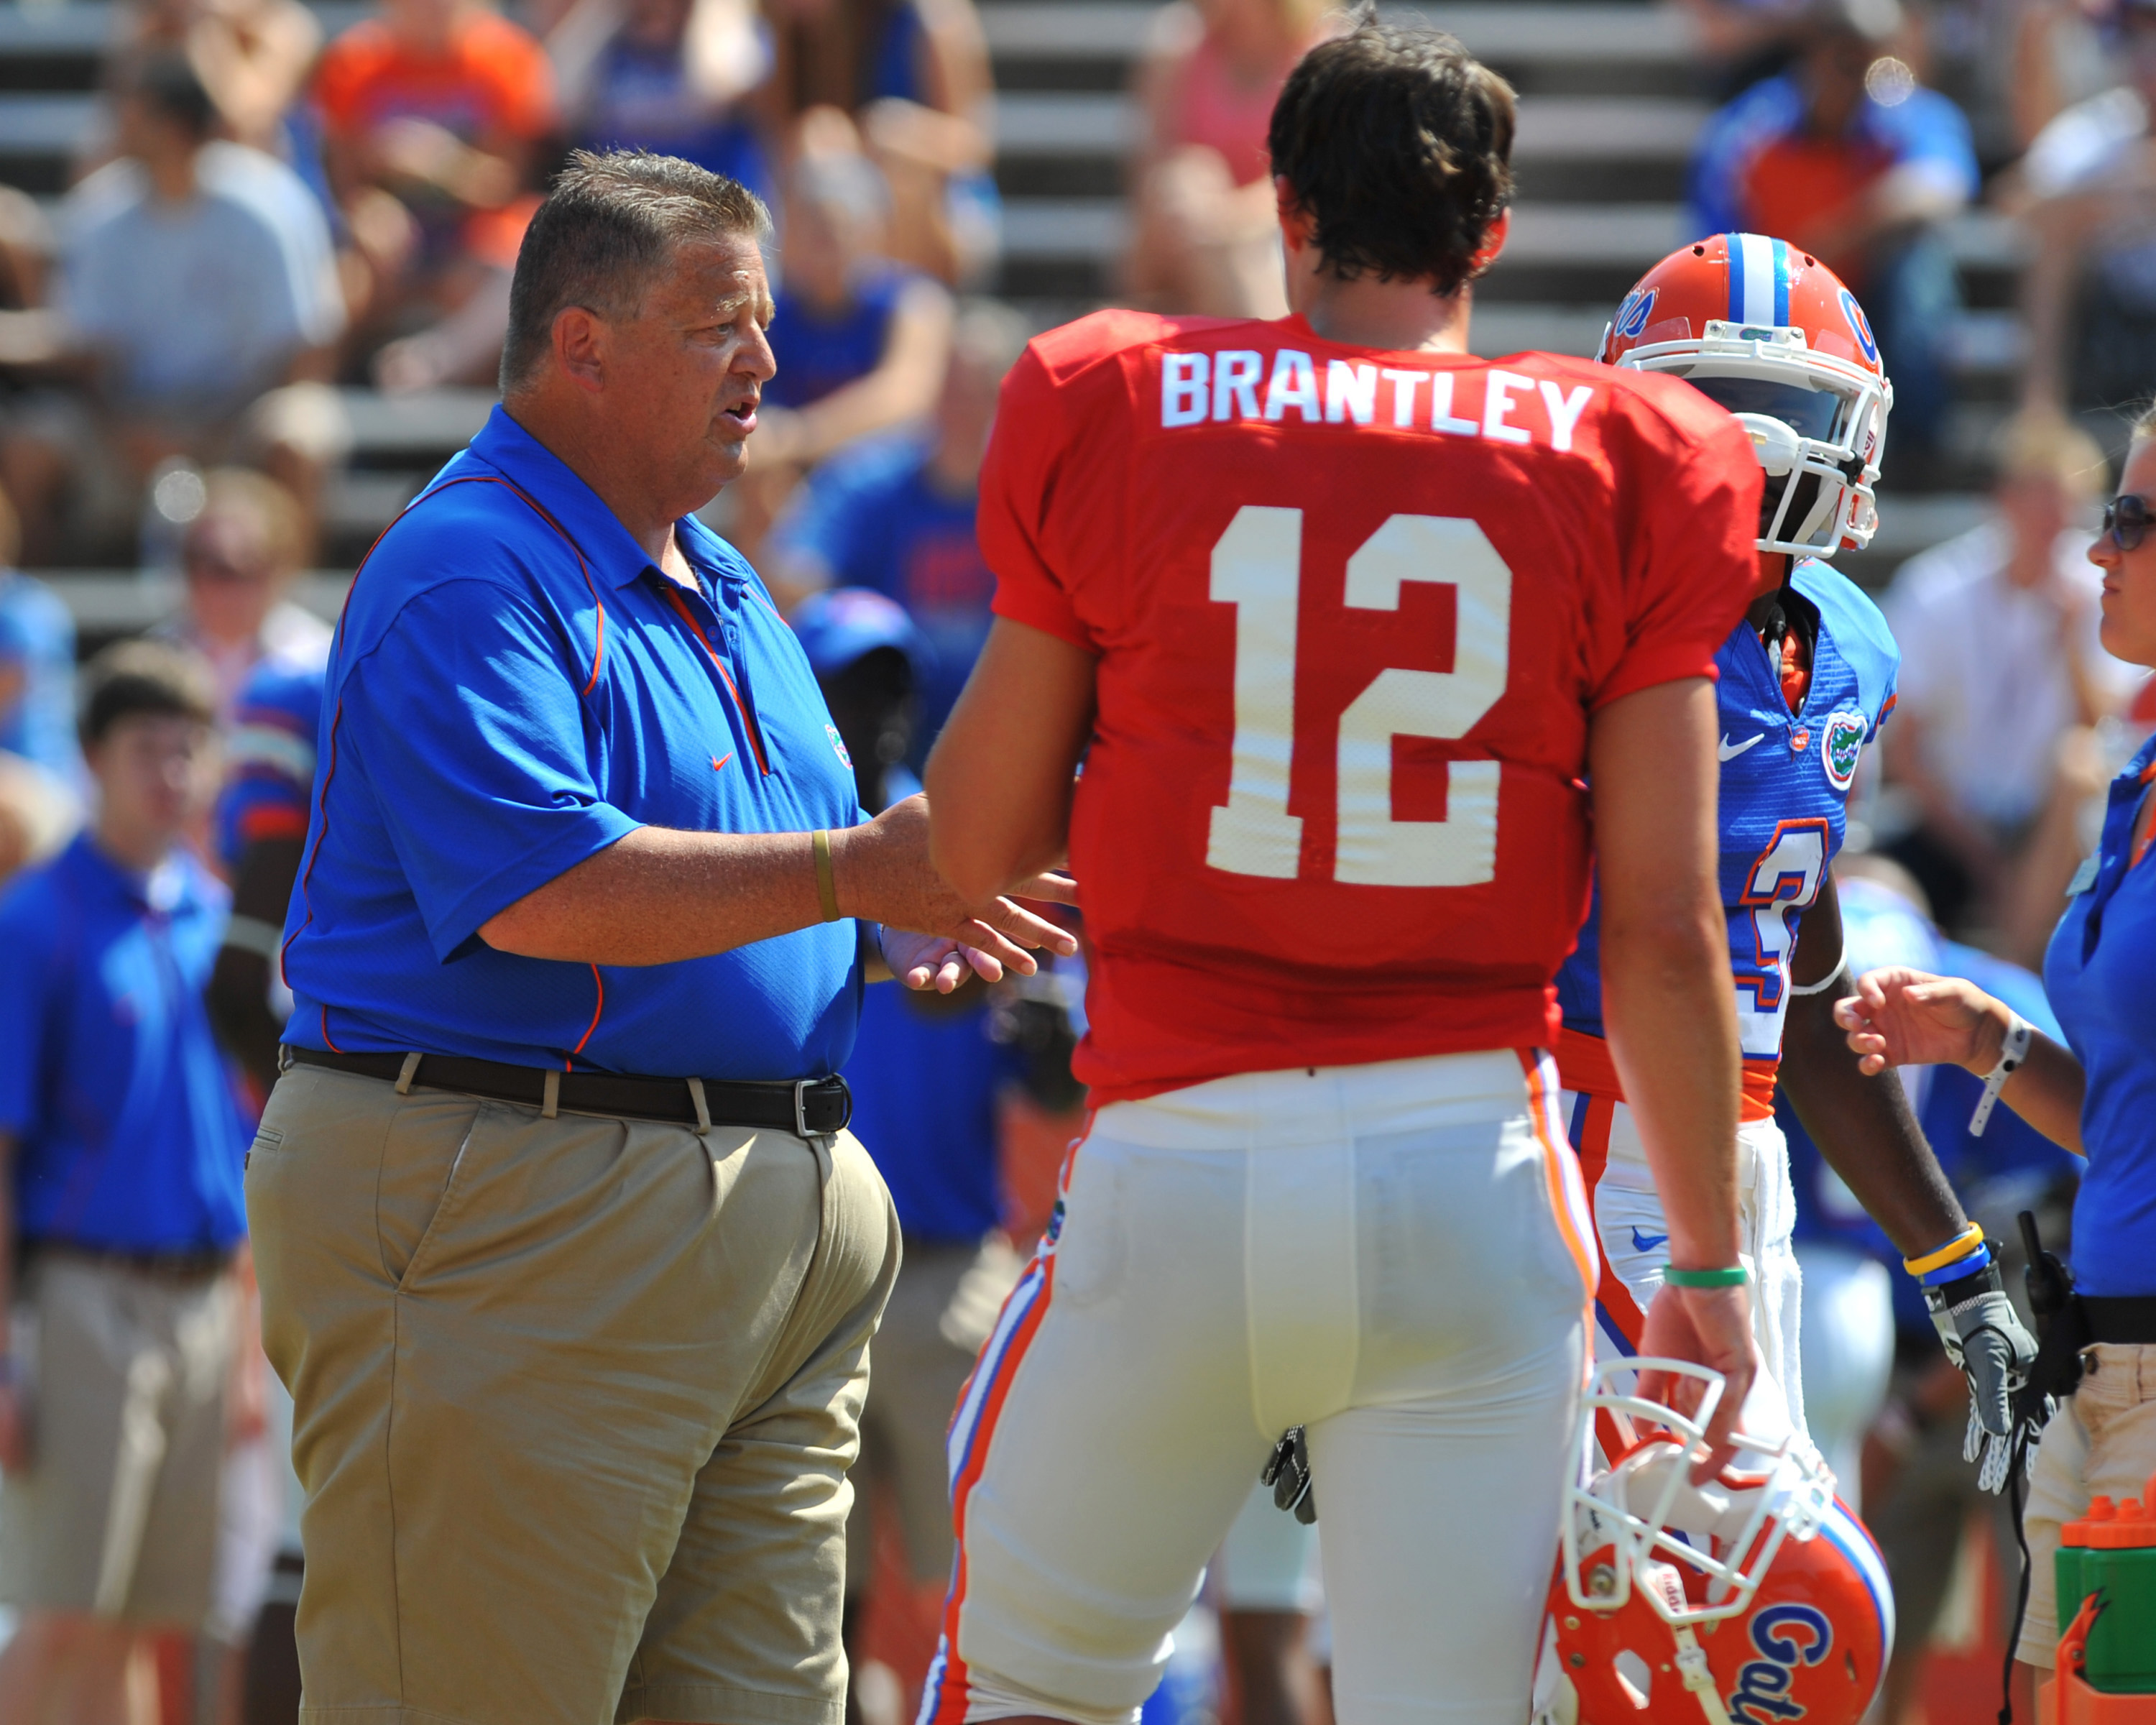 GAINESVILLE, FL - APRIL 9:  Offensive coordinator Charlie Weis of the Florida Gators directs play with quarterback John Bantley #12 during the Orange and Blue spring football game April 9, 2011 at Ben Hill Griffin Stadium in Gainesville, Florida.  (Photo